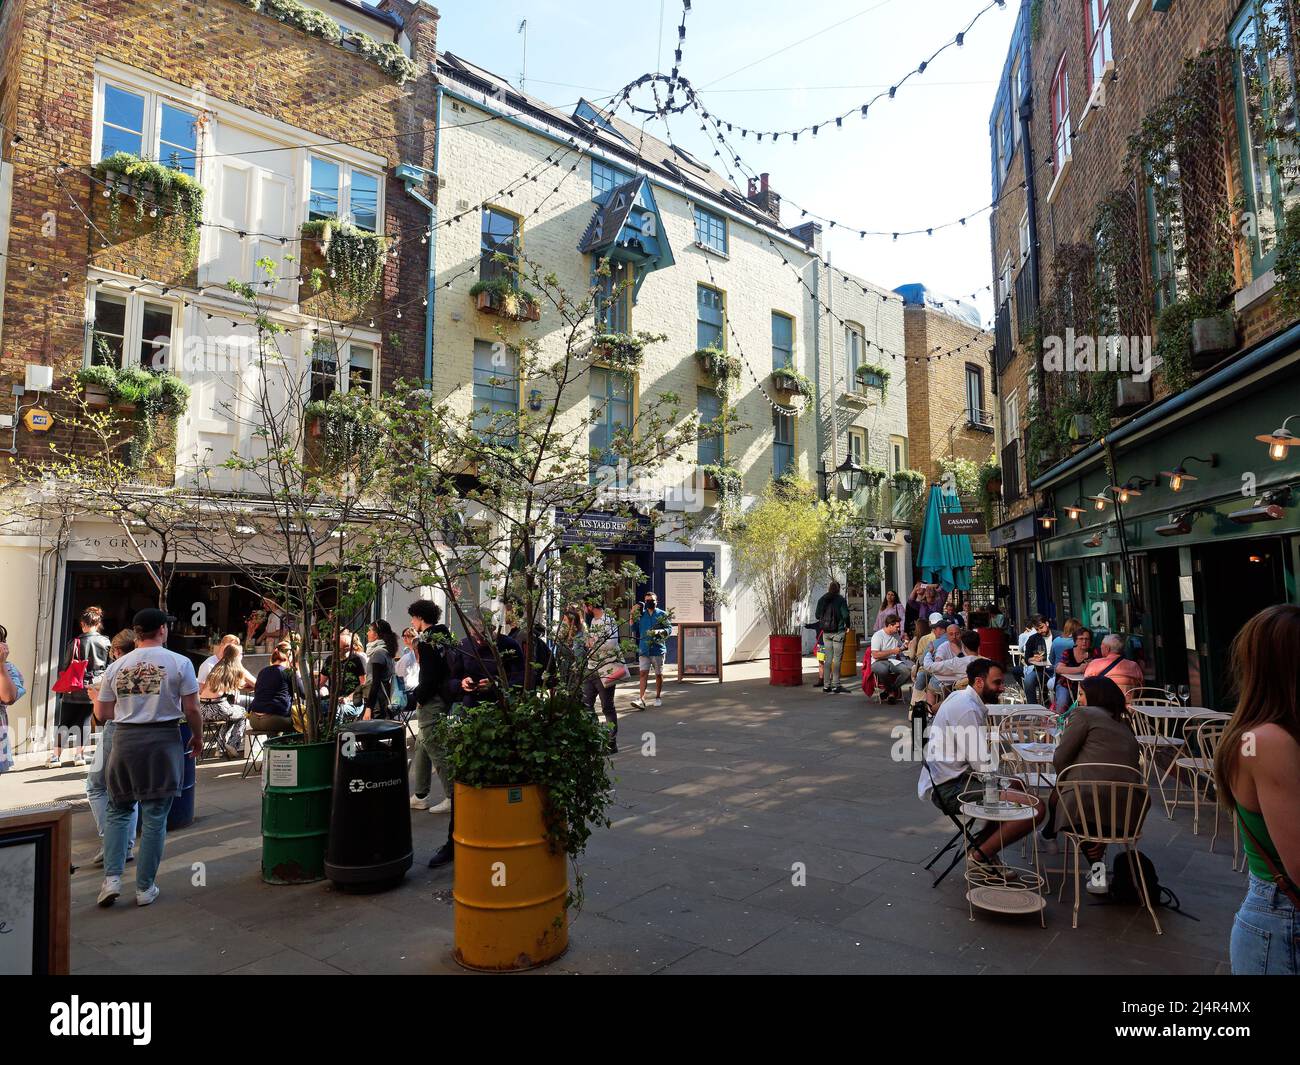 View of Neal's Yard a colourful hidden courtyard of independent restaurants, bars and shops in Covent Garden London Stock Photo